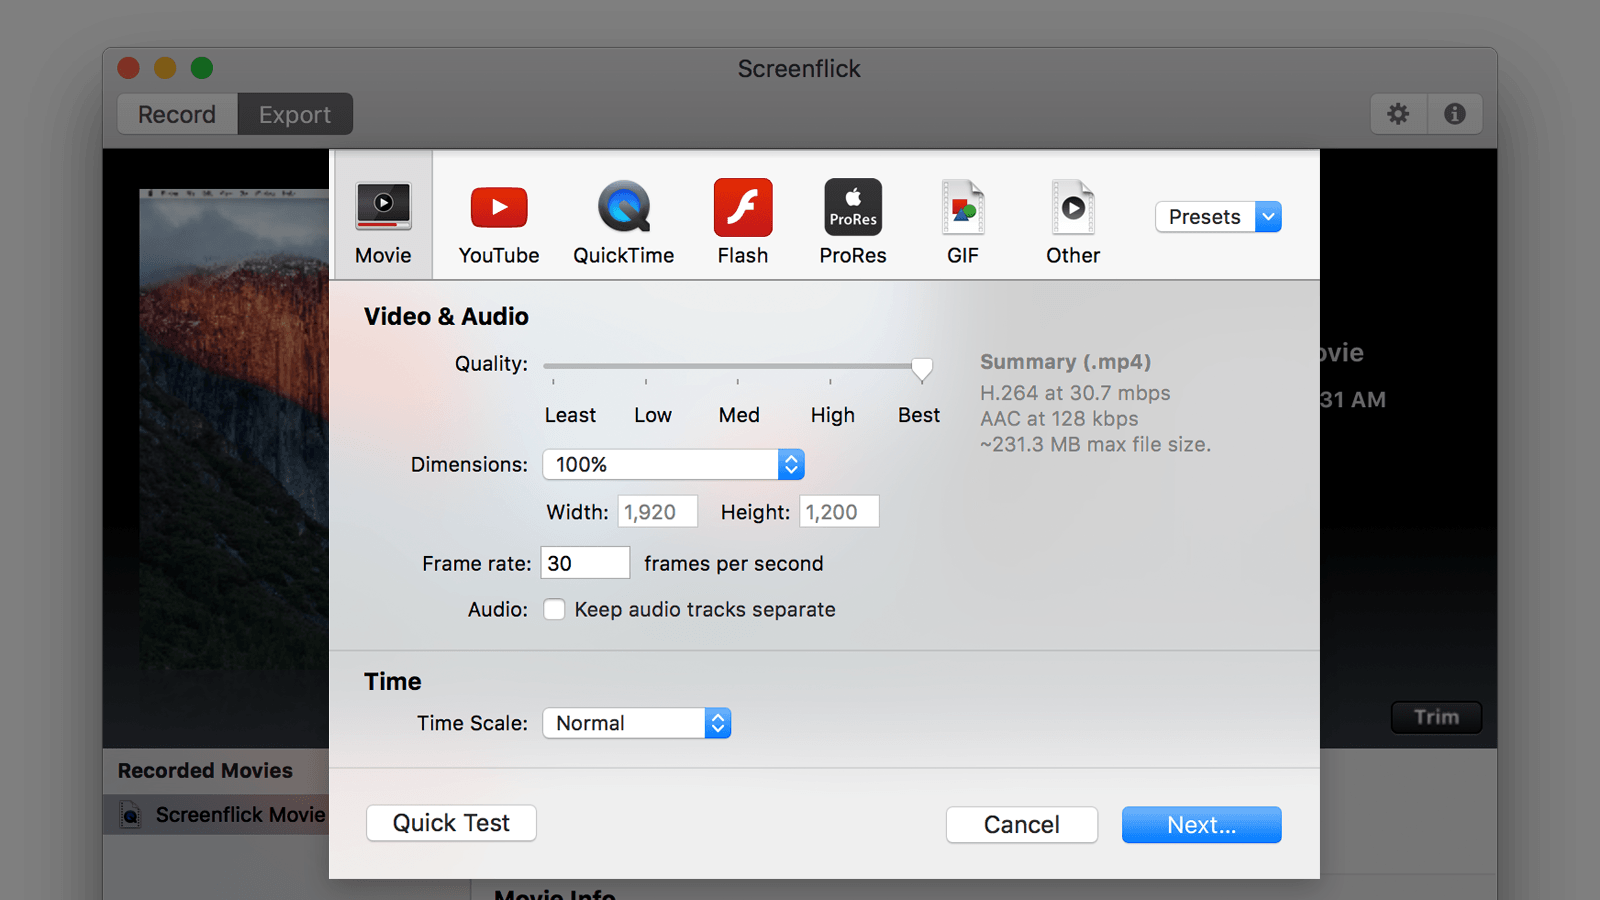 quicktime movie editor for mac